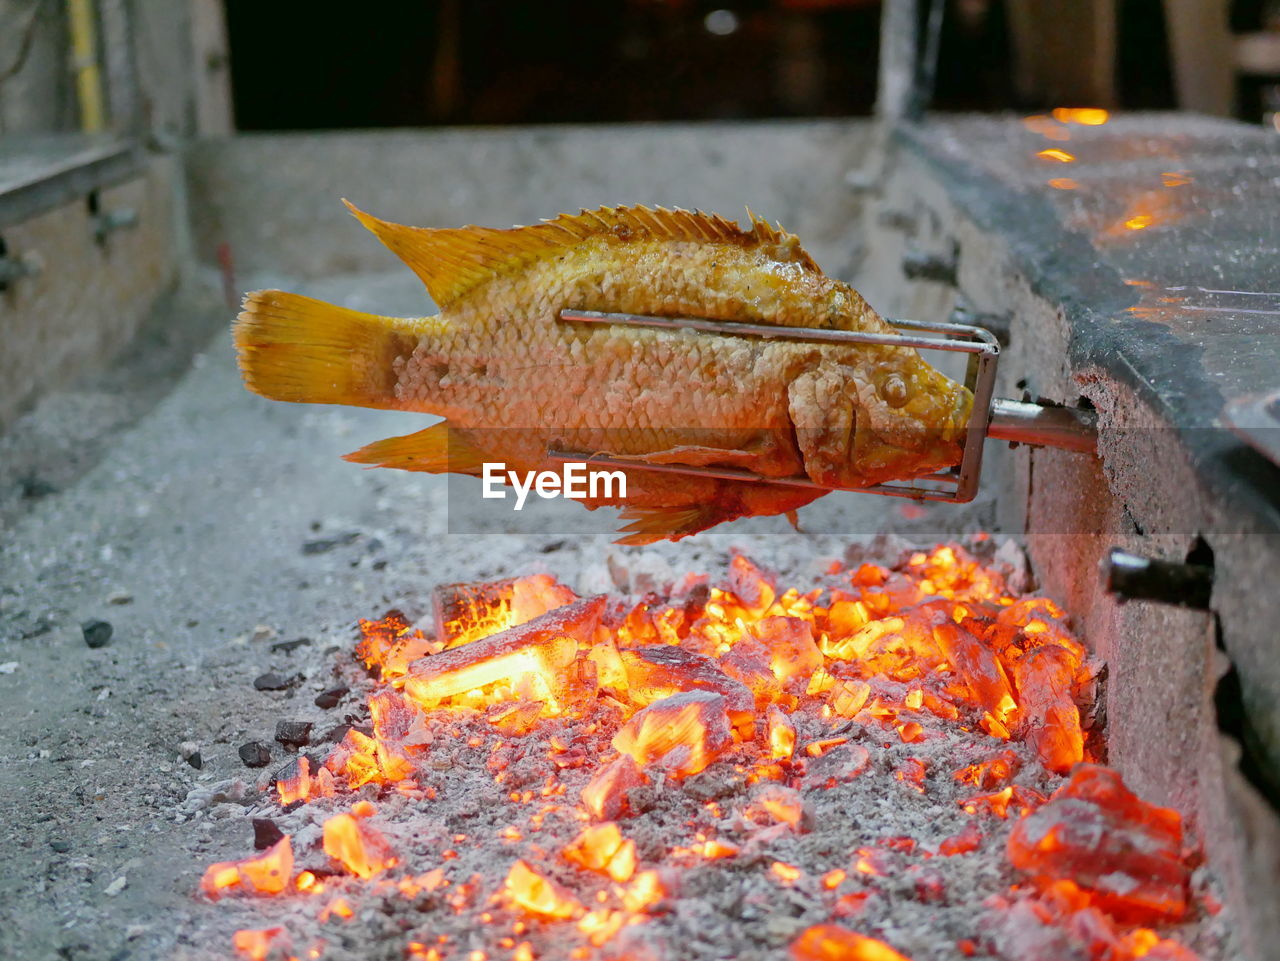 Grilled fish, red tilapia, plaa tubtim, pla pao, and red burning charcoals in a big stove